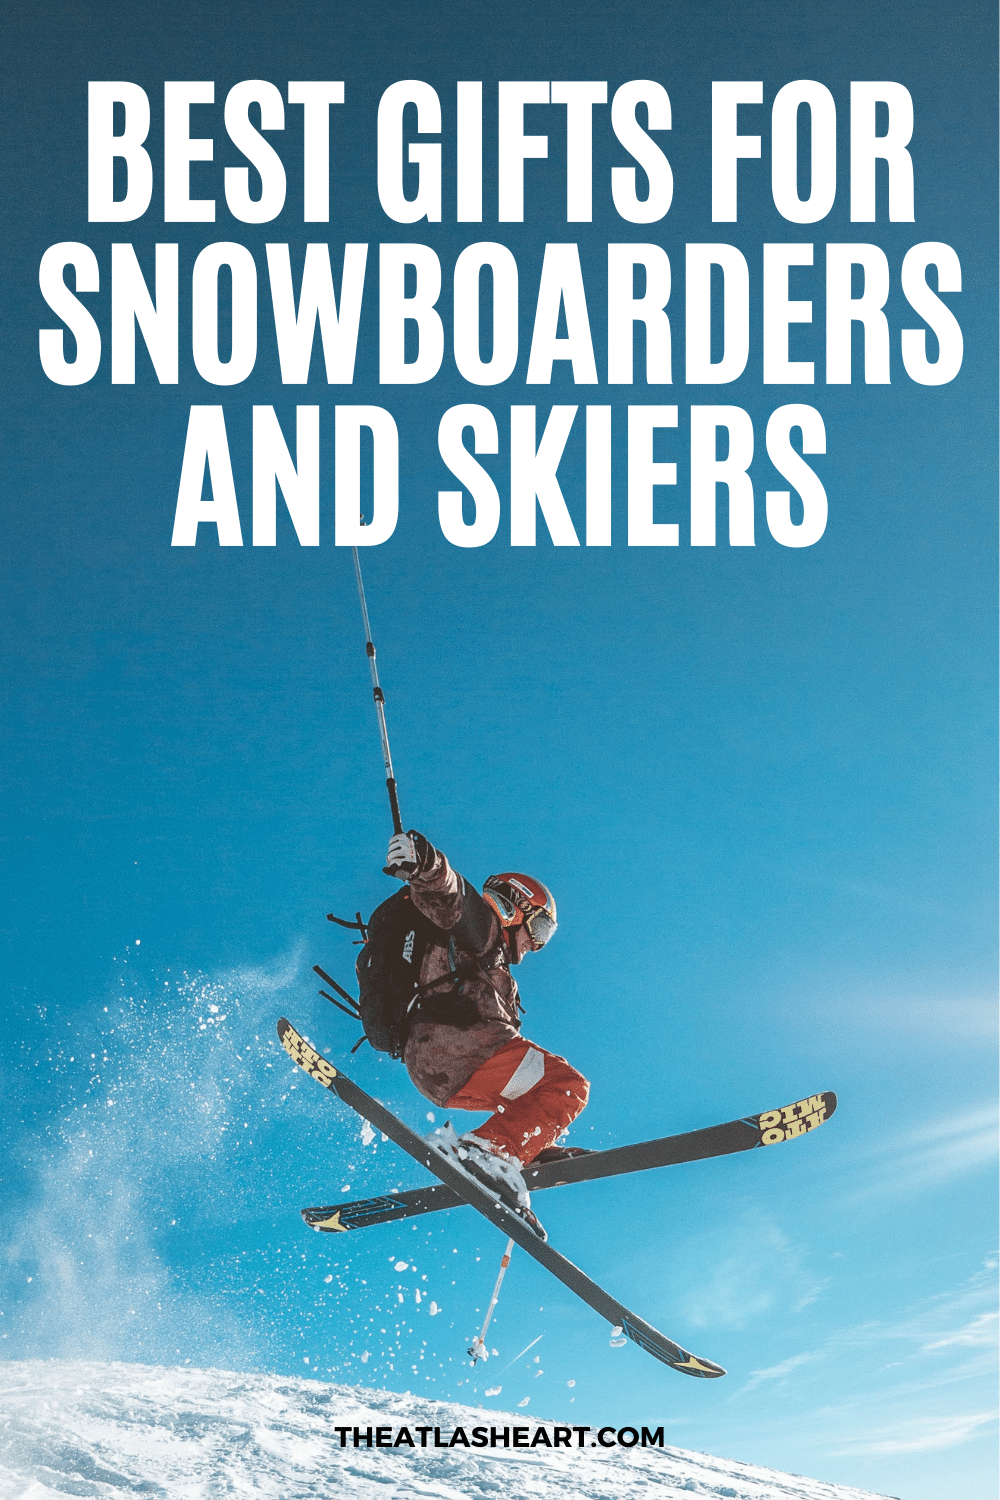 31 Best Gifts for Snowboarders (That They’ll Actually Use)